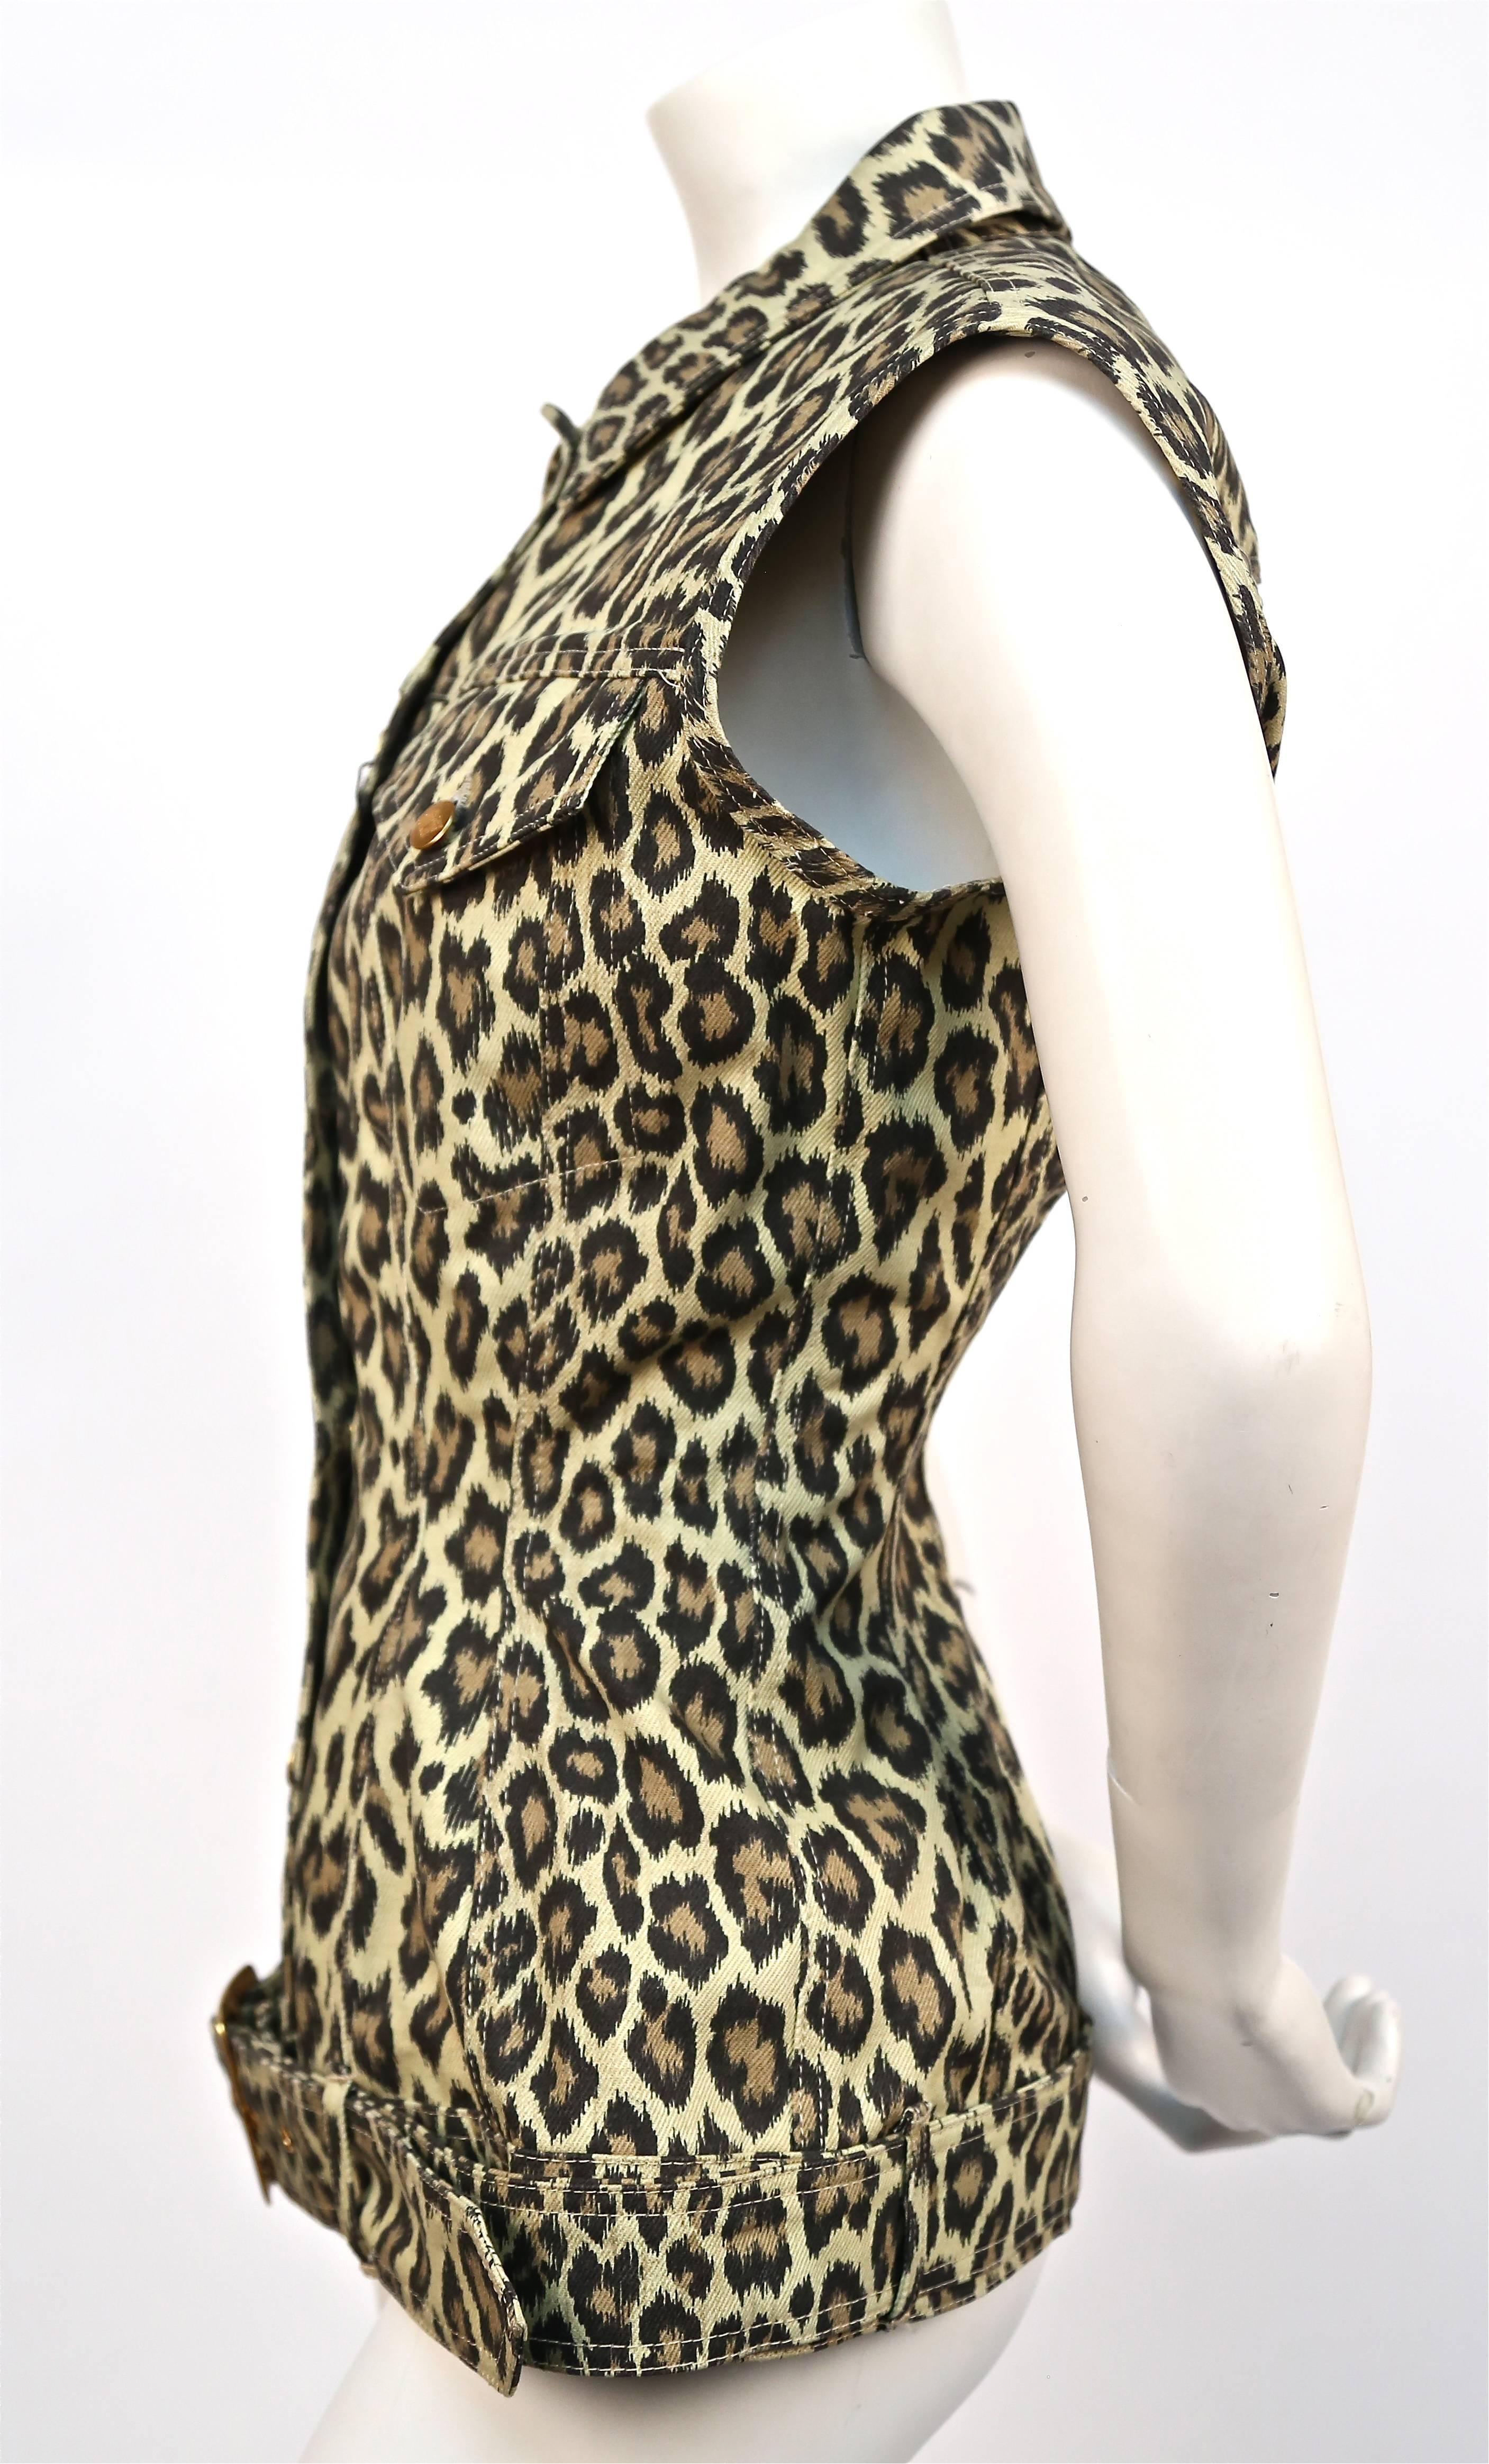 Very rare leopard printed denim corset jacket from Jean Paul Gaultier Junior dating to the 1988. Labeled an Italian size 44. Jacket measures approximately 37